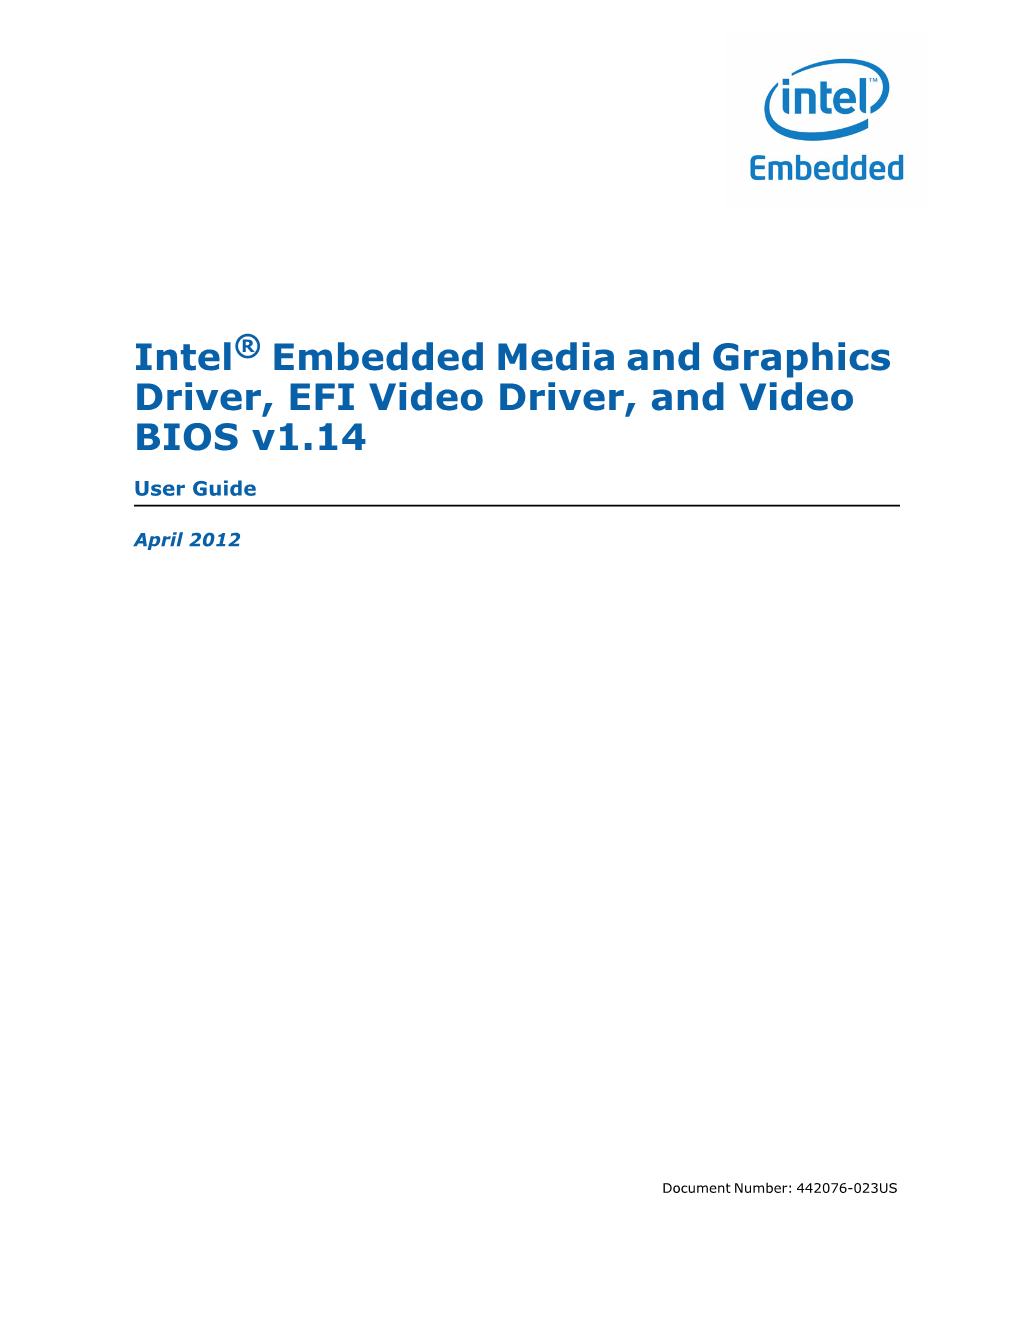 Intel® Embedded Media and Graphics Driver, EFI Video Driver, and Video BIOS V1.14